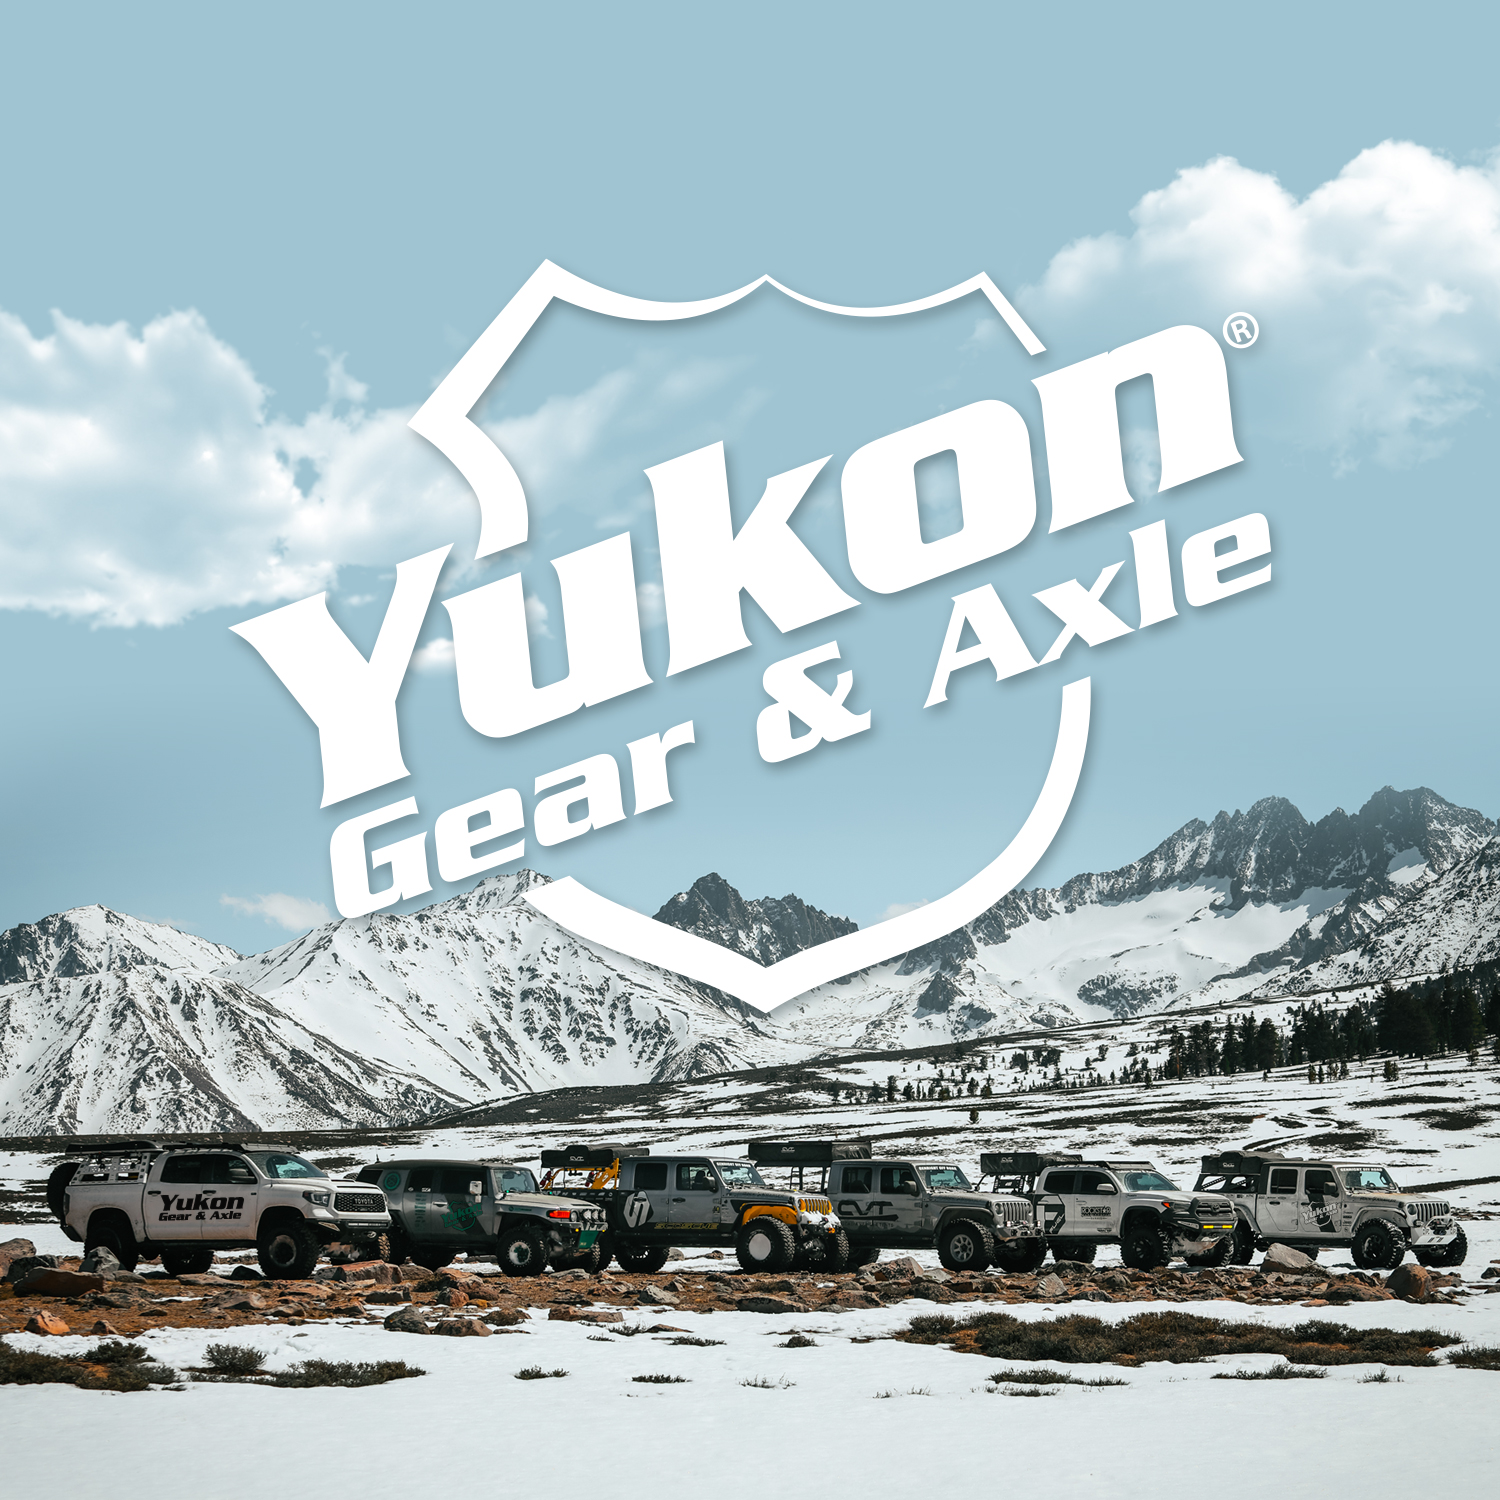 Yukon Rear Double-Drilled Brake Rotor for Jeep Wrangler 5x5" and 5x5.5" 